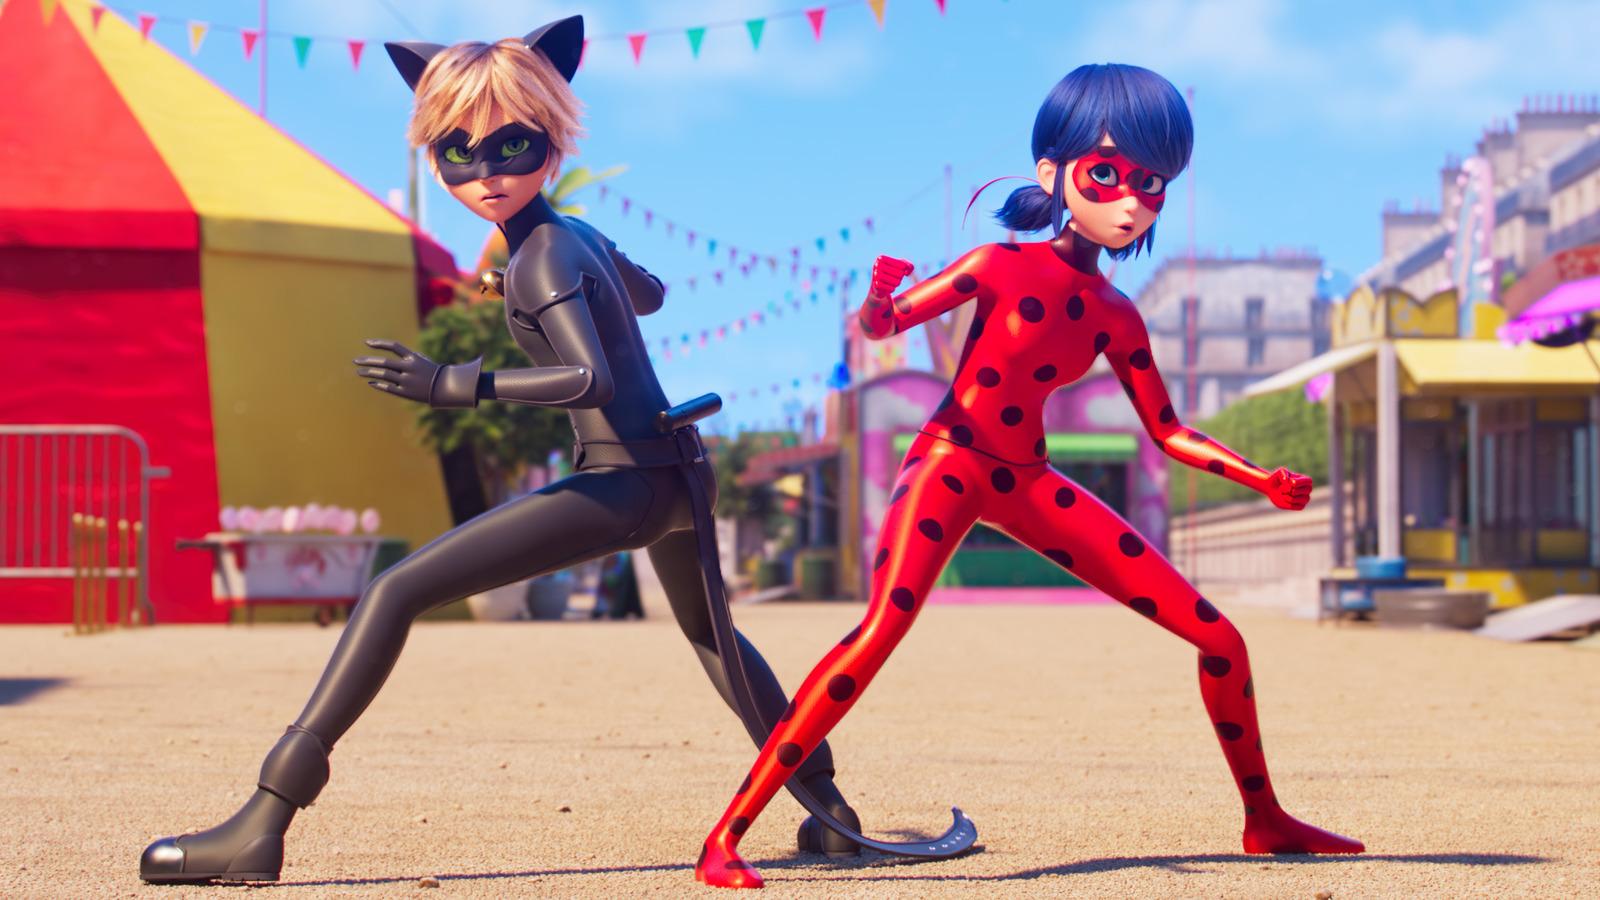 Miraculous: Ladybug and Cat Noir, the Movie - Back to the